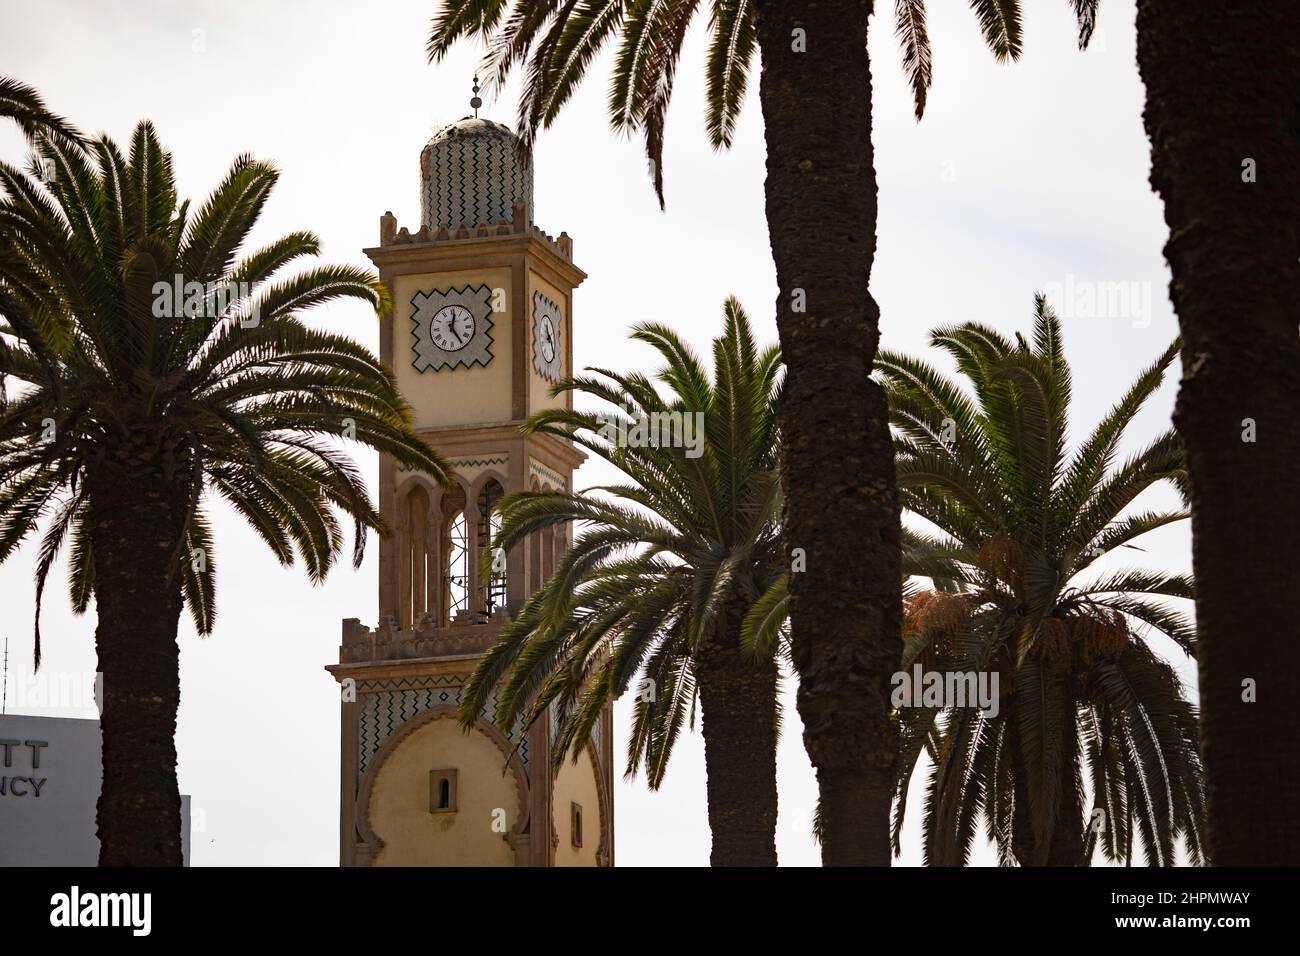 Clock tower in central Casablanca, Morocco. September, 2019 - photo by Jake Lyell for the IMF. Stock Photo